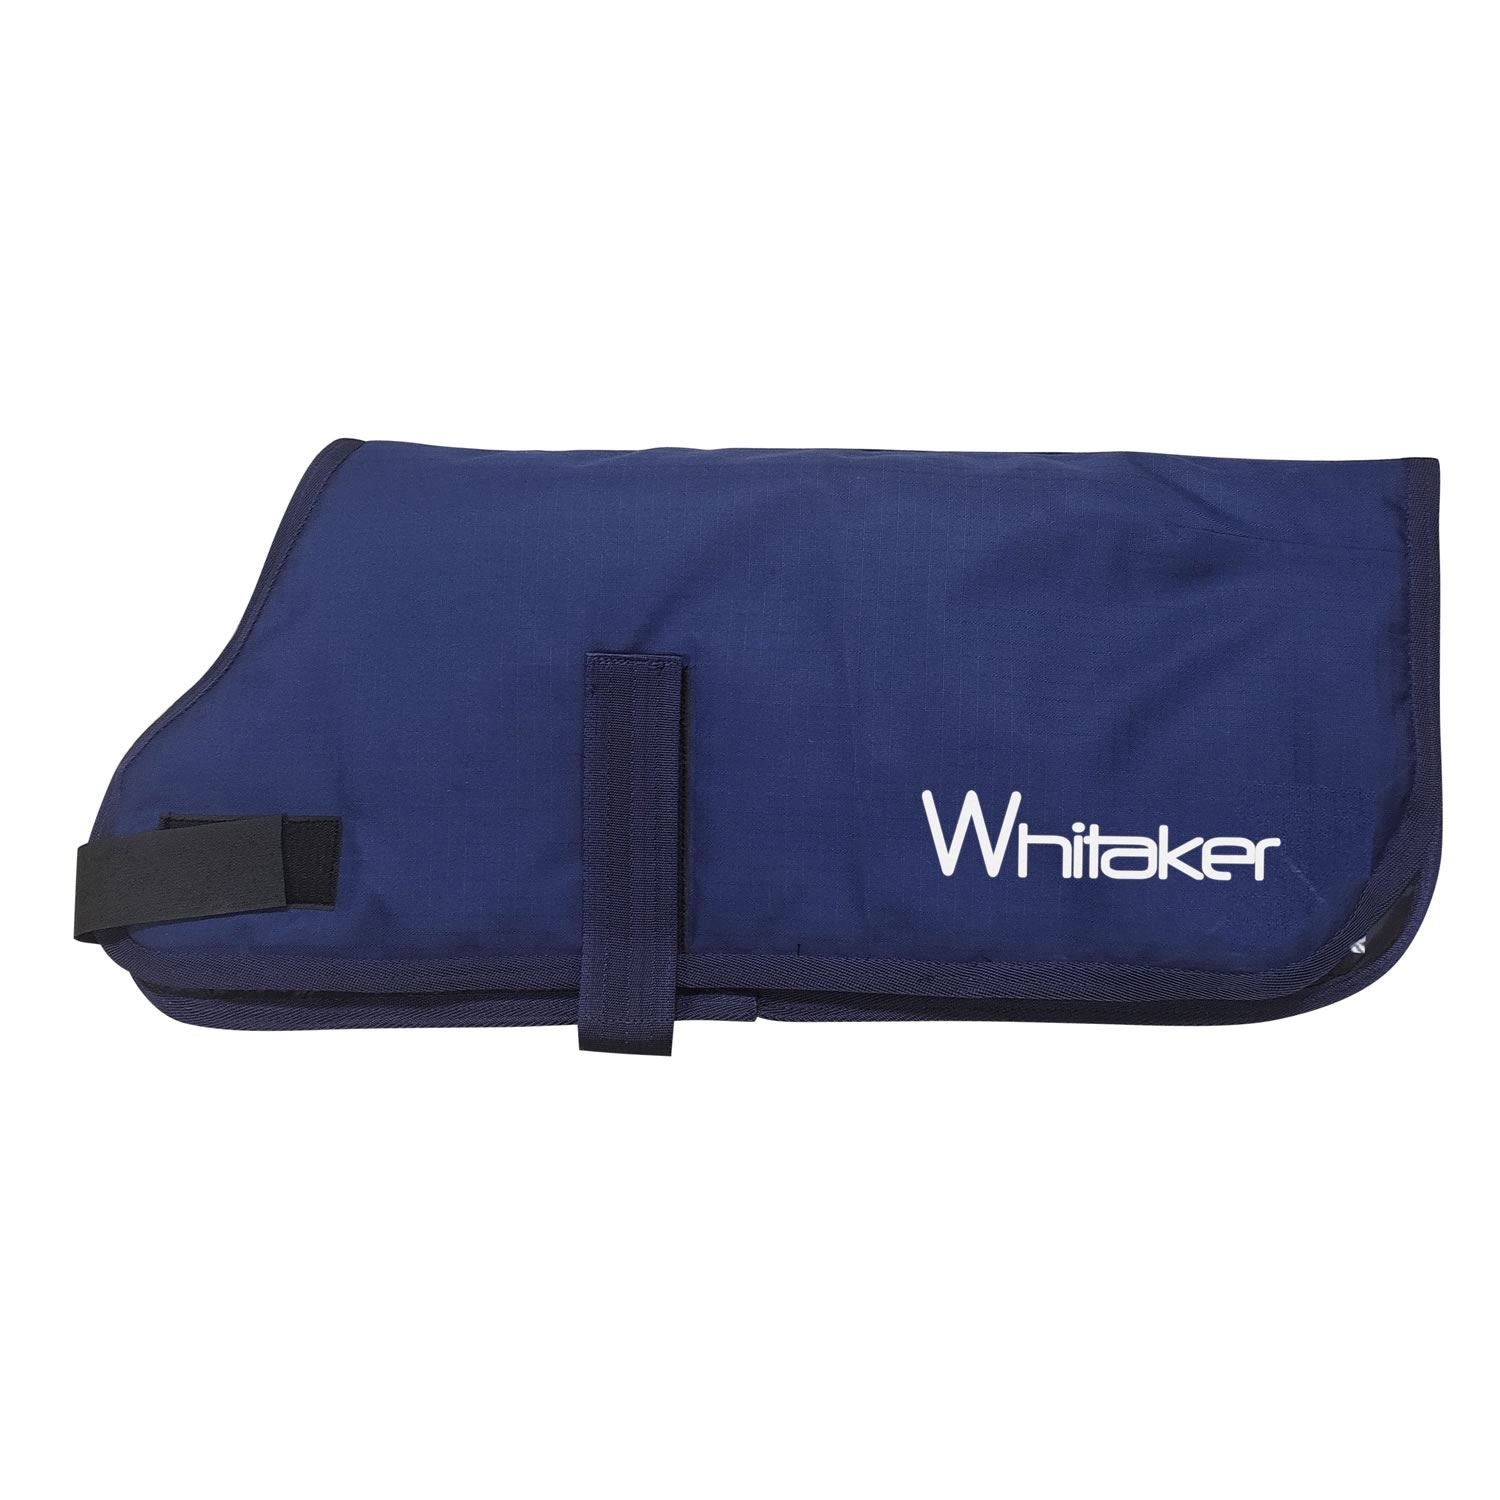 Whitaker Dog Coat Weir - Just Horse Riders